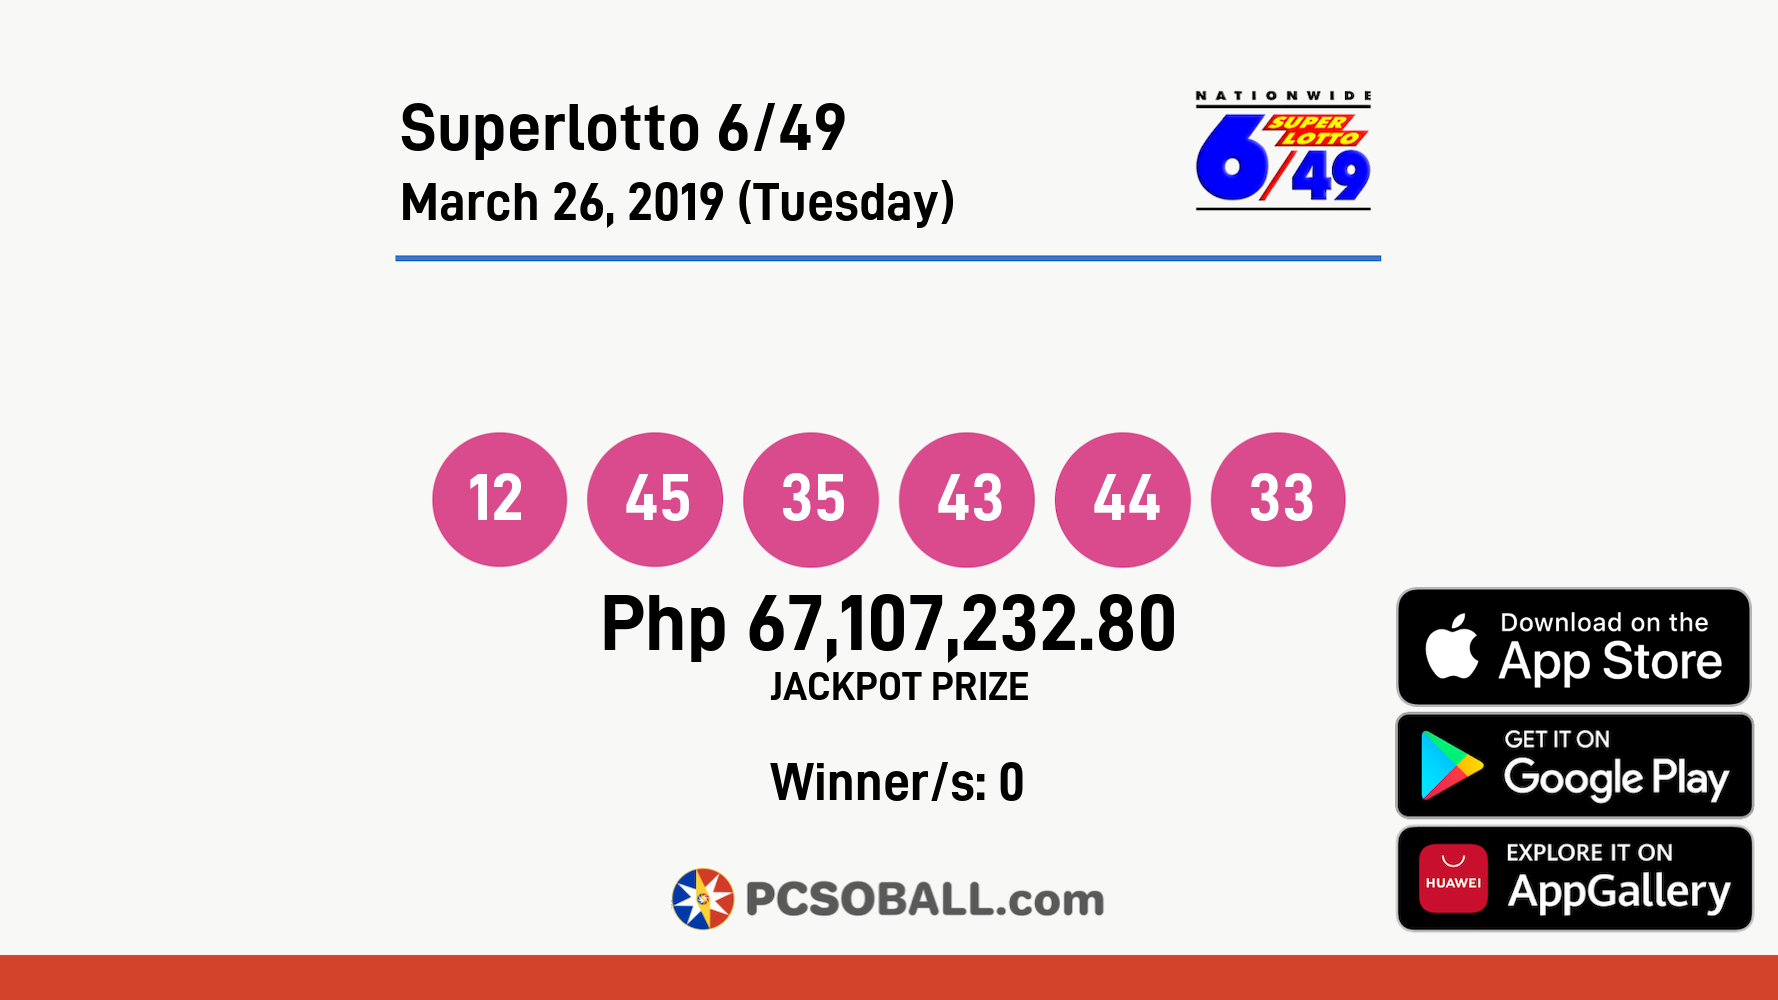 Superlotto 6/49 March 26, 2019 (Tuesday) Result